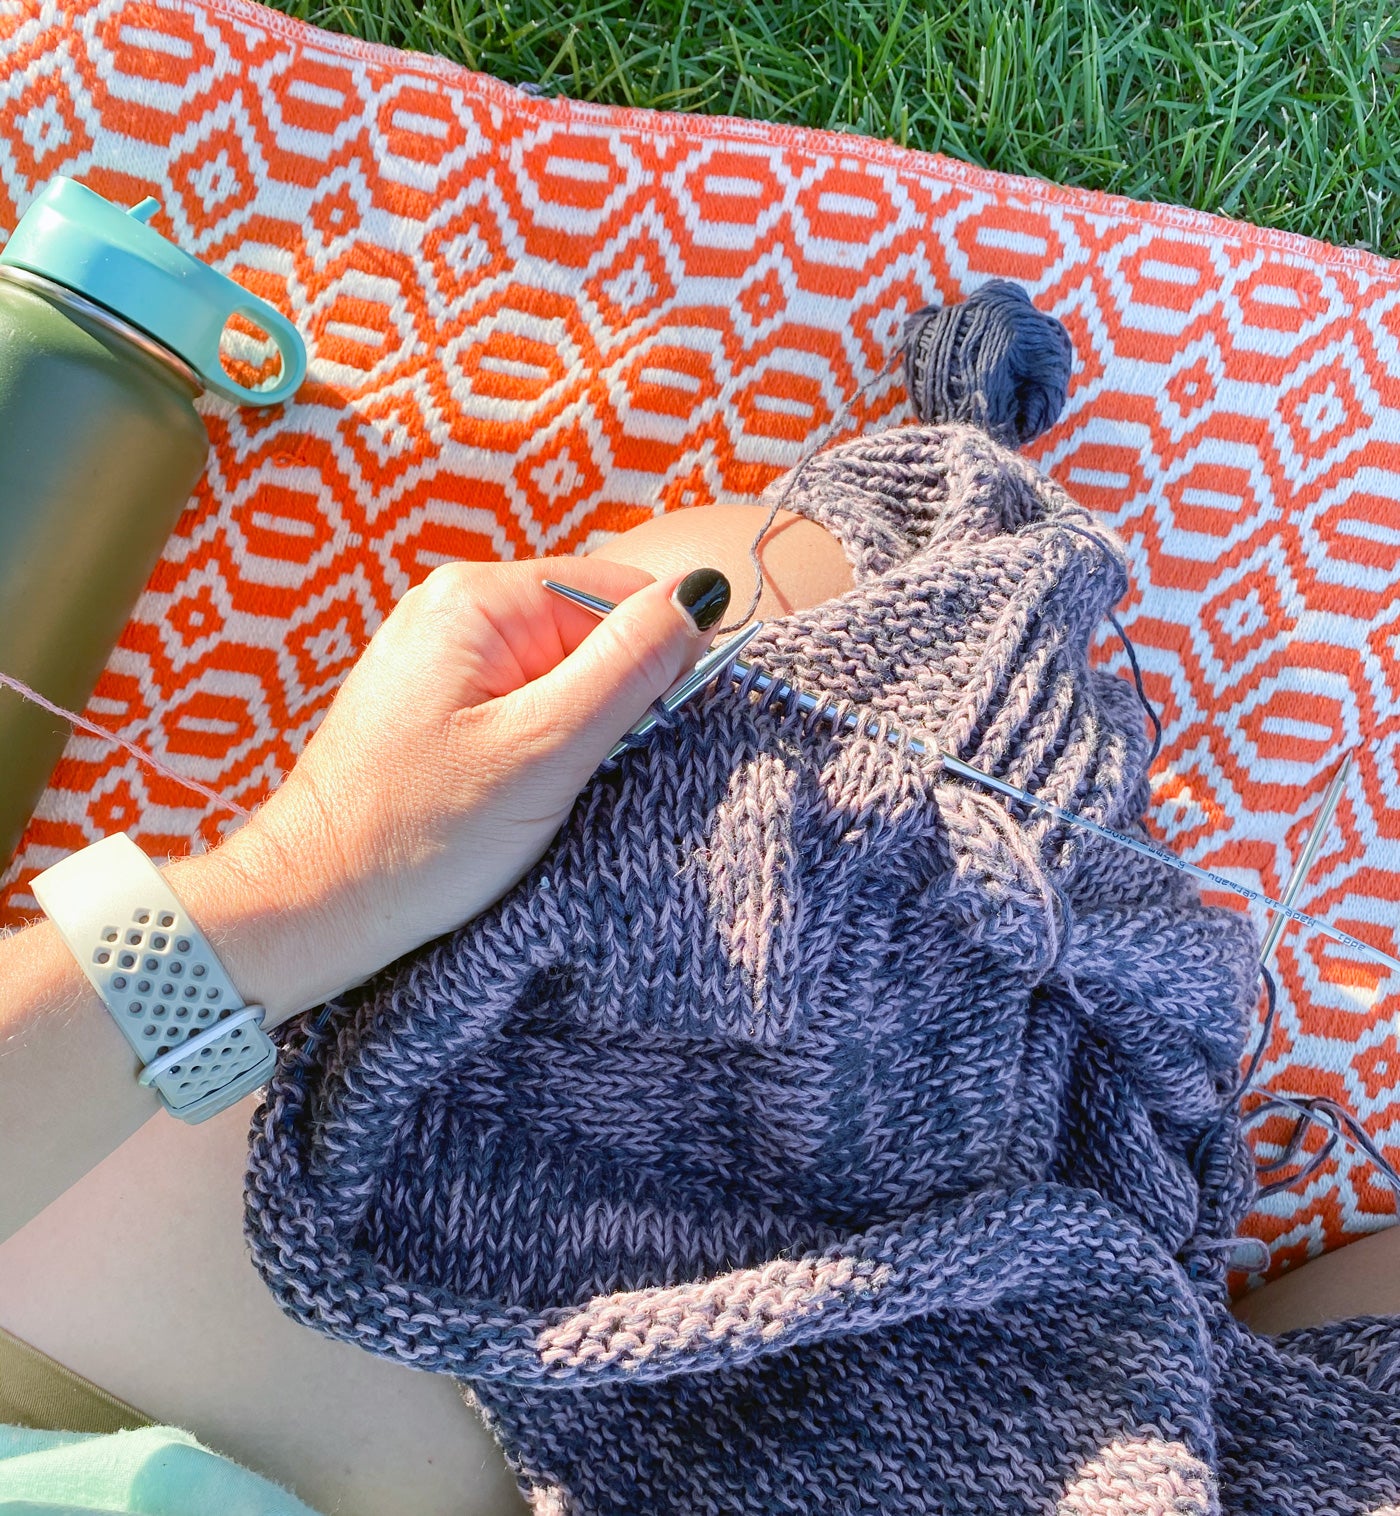 A close-up of someone's hands knitting a cotton garment, they sit crosslegged on a poppy-red and white patterned picnic blanket on lush green grass, with a green metal water bottle laying next to them. 